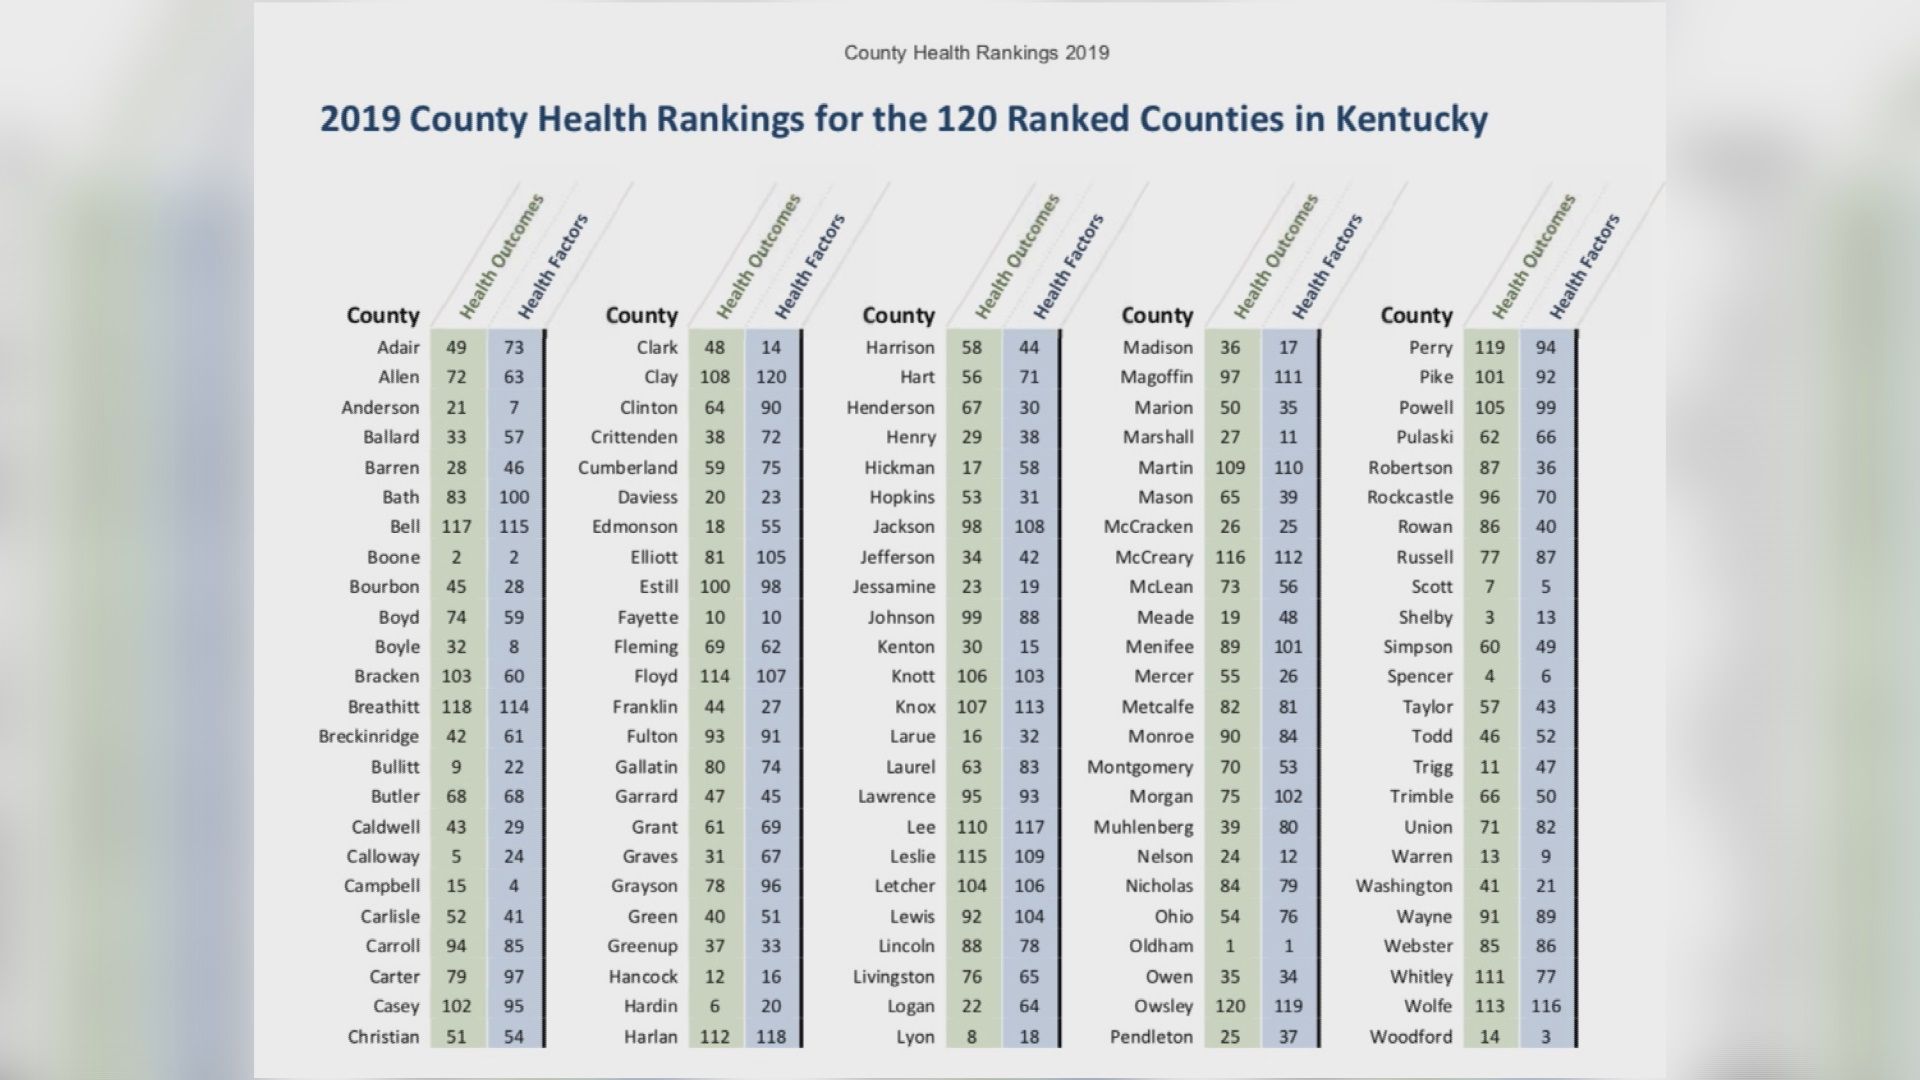 Eastern Kentucky trails rest of state in health outcomes